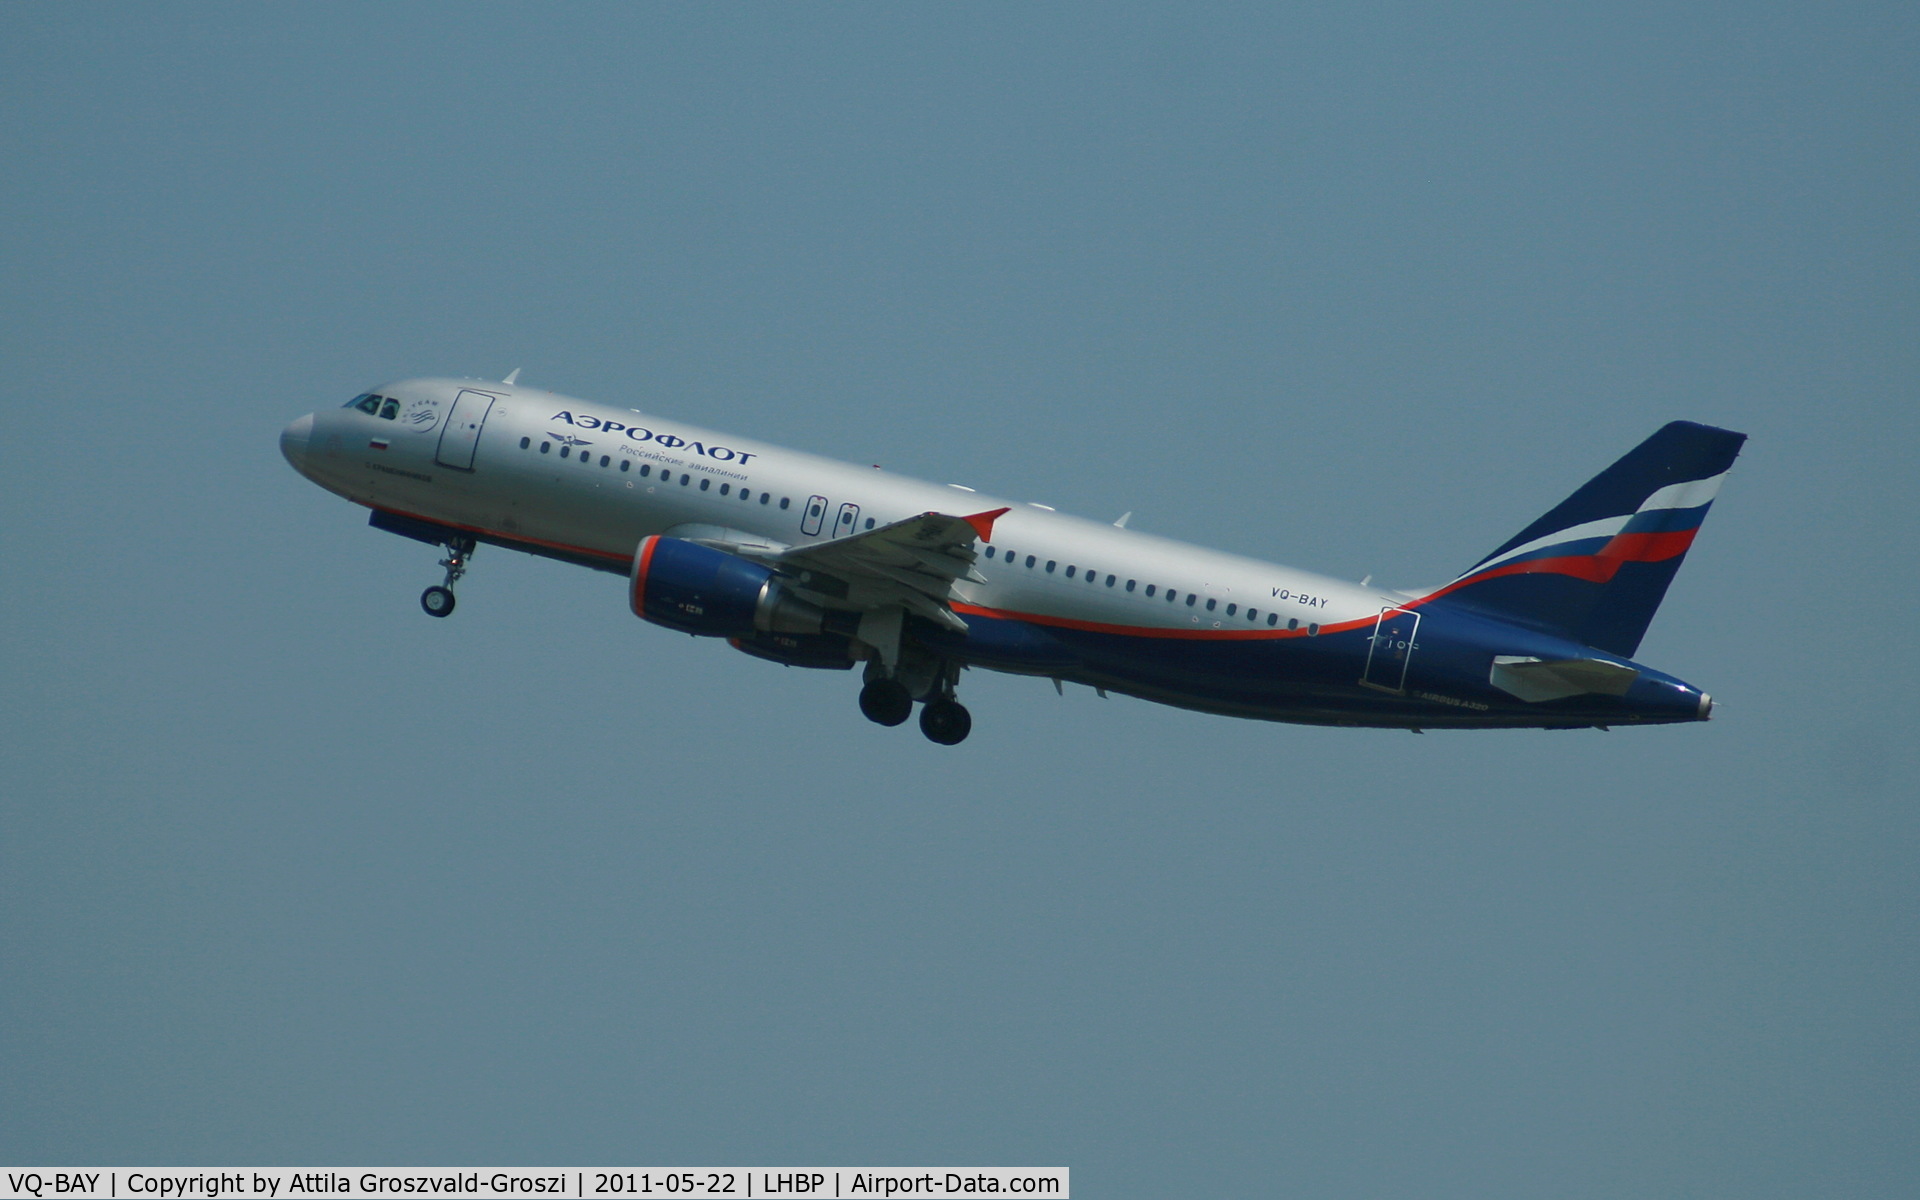 VQ-BAY, 2009 Airbus A320-214 C/N 3786, Budapest Liszt Ferenc International Airport - Fly